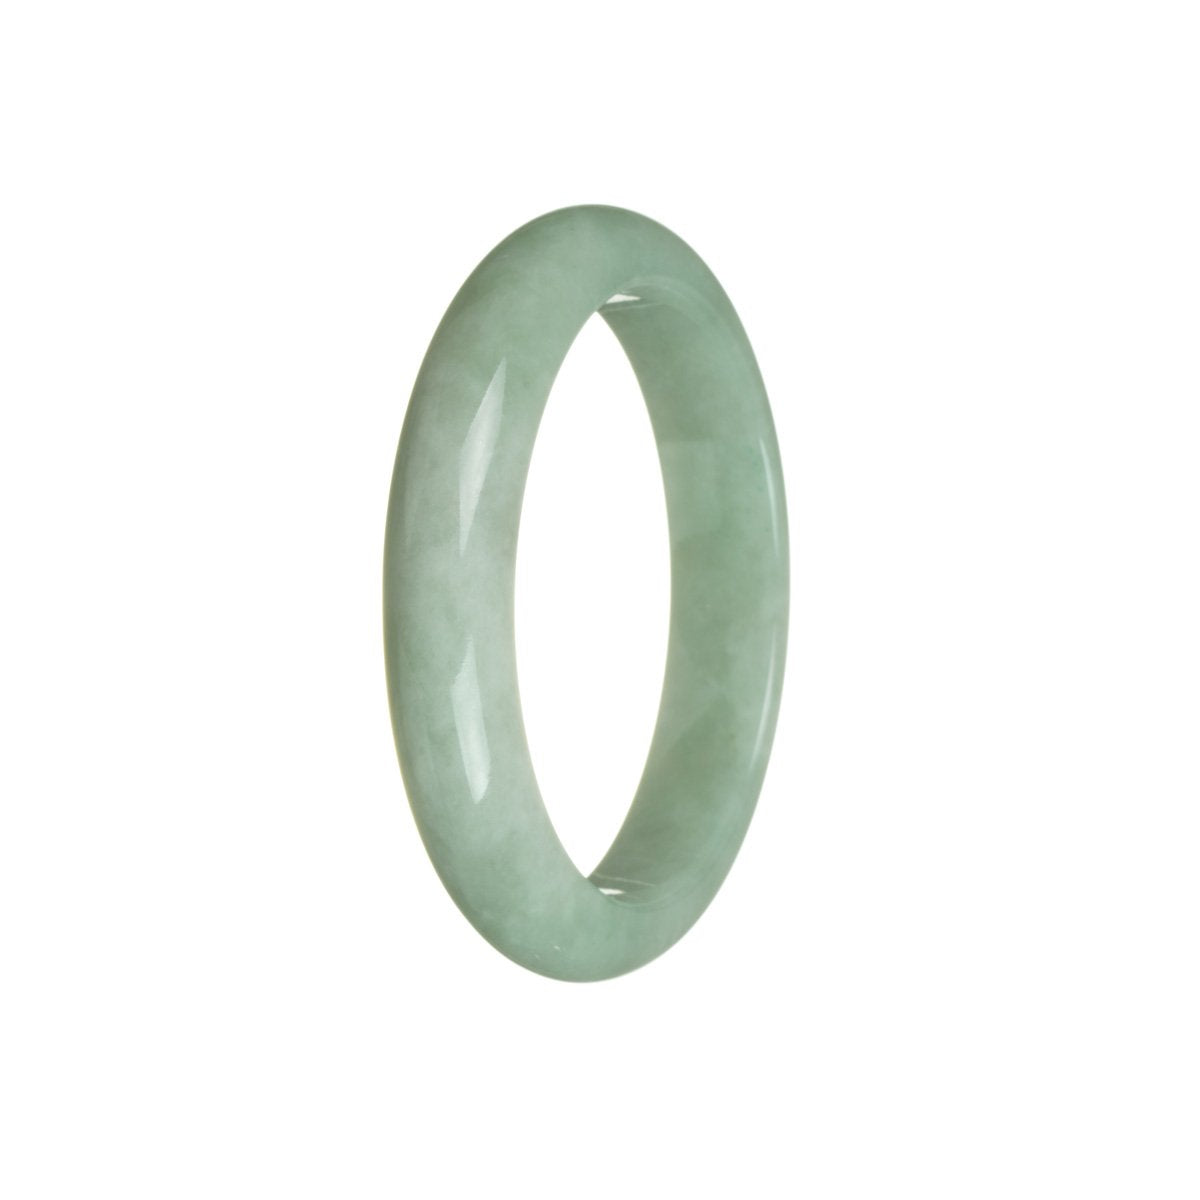 A half moon shaped green jadeite bracelet, showcasing the natural beauty and authenticity of the stone.